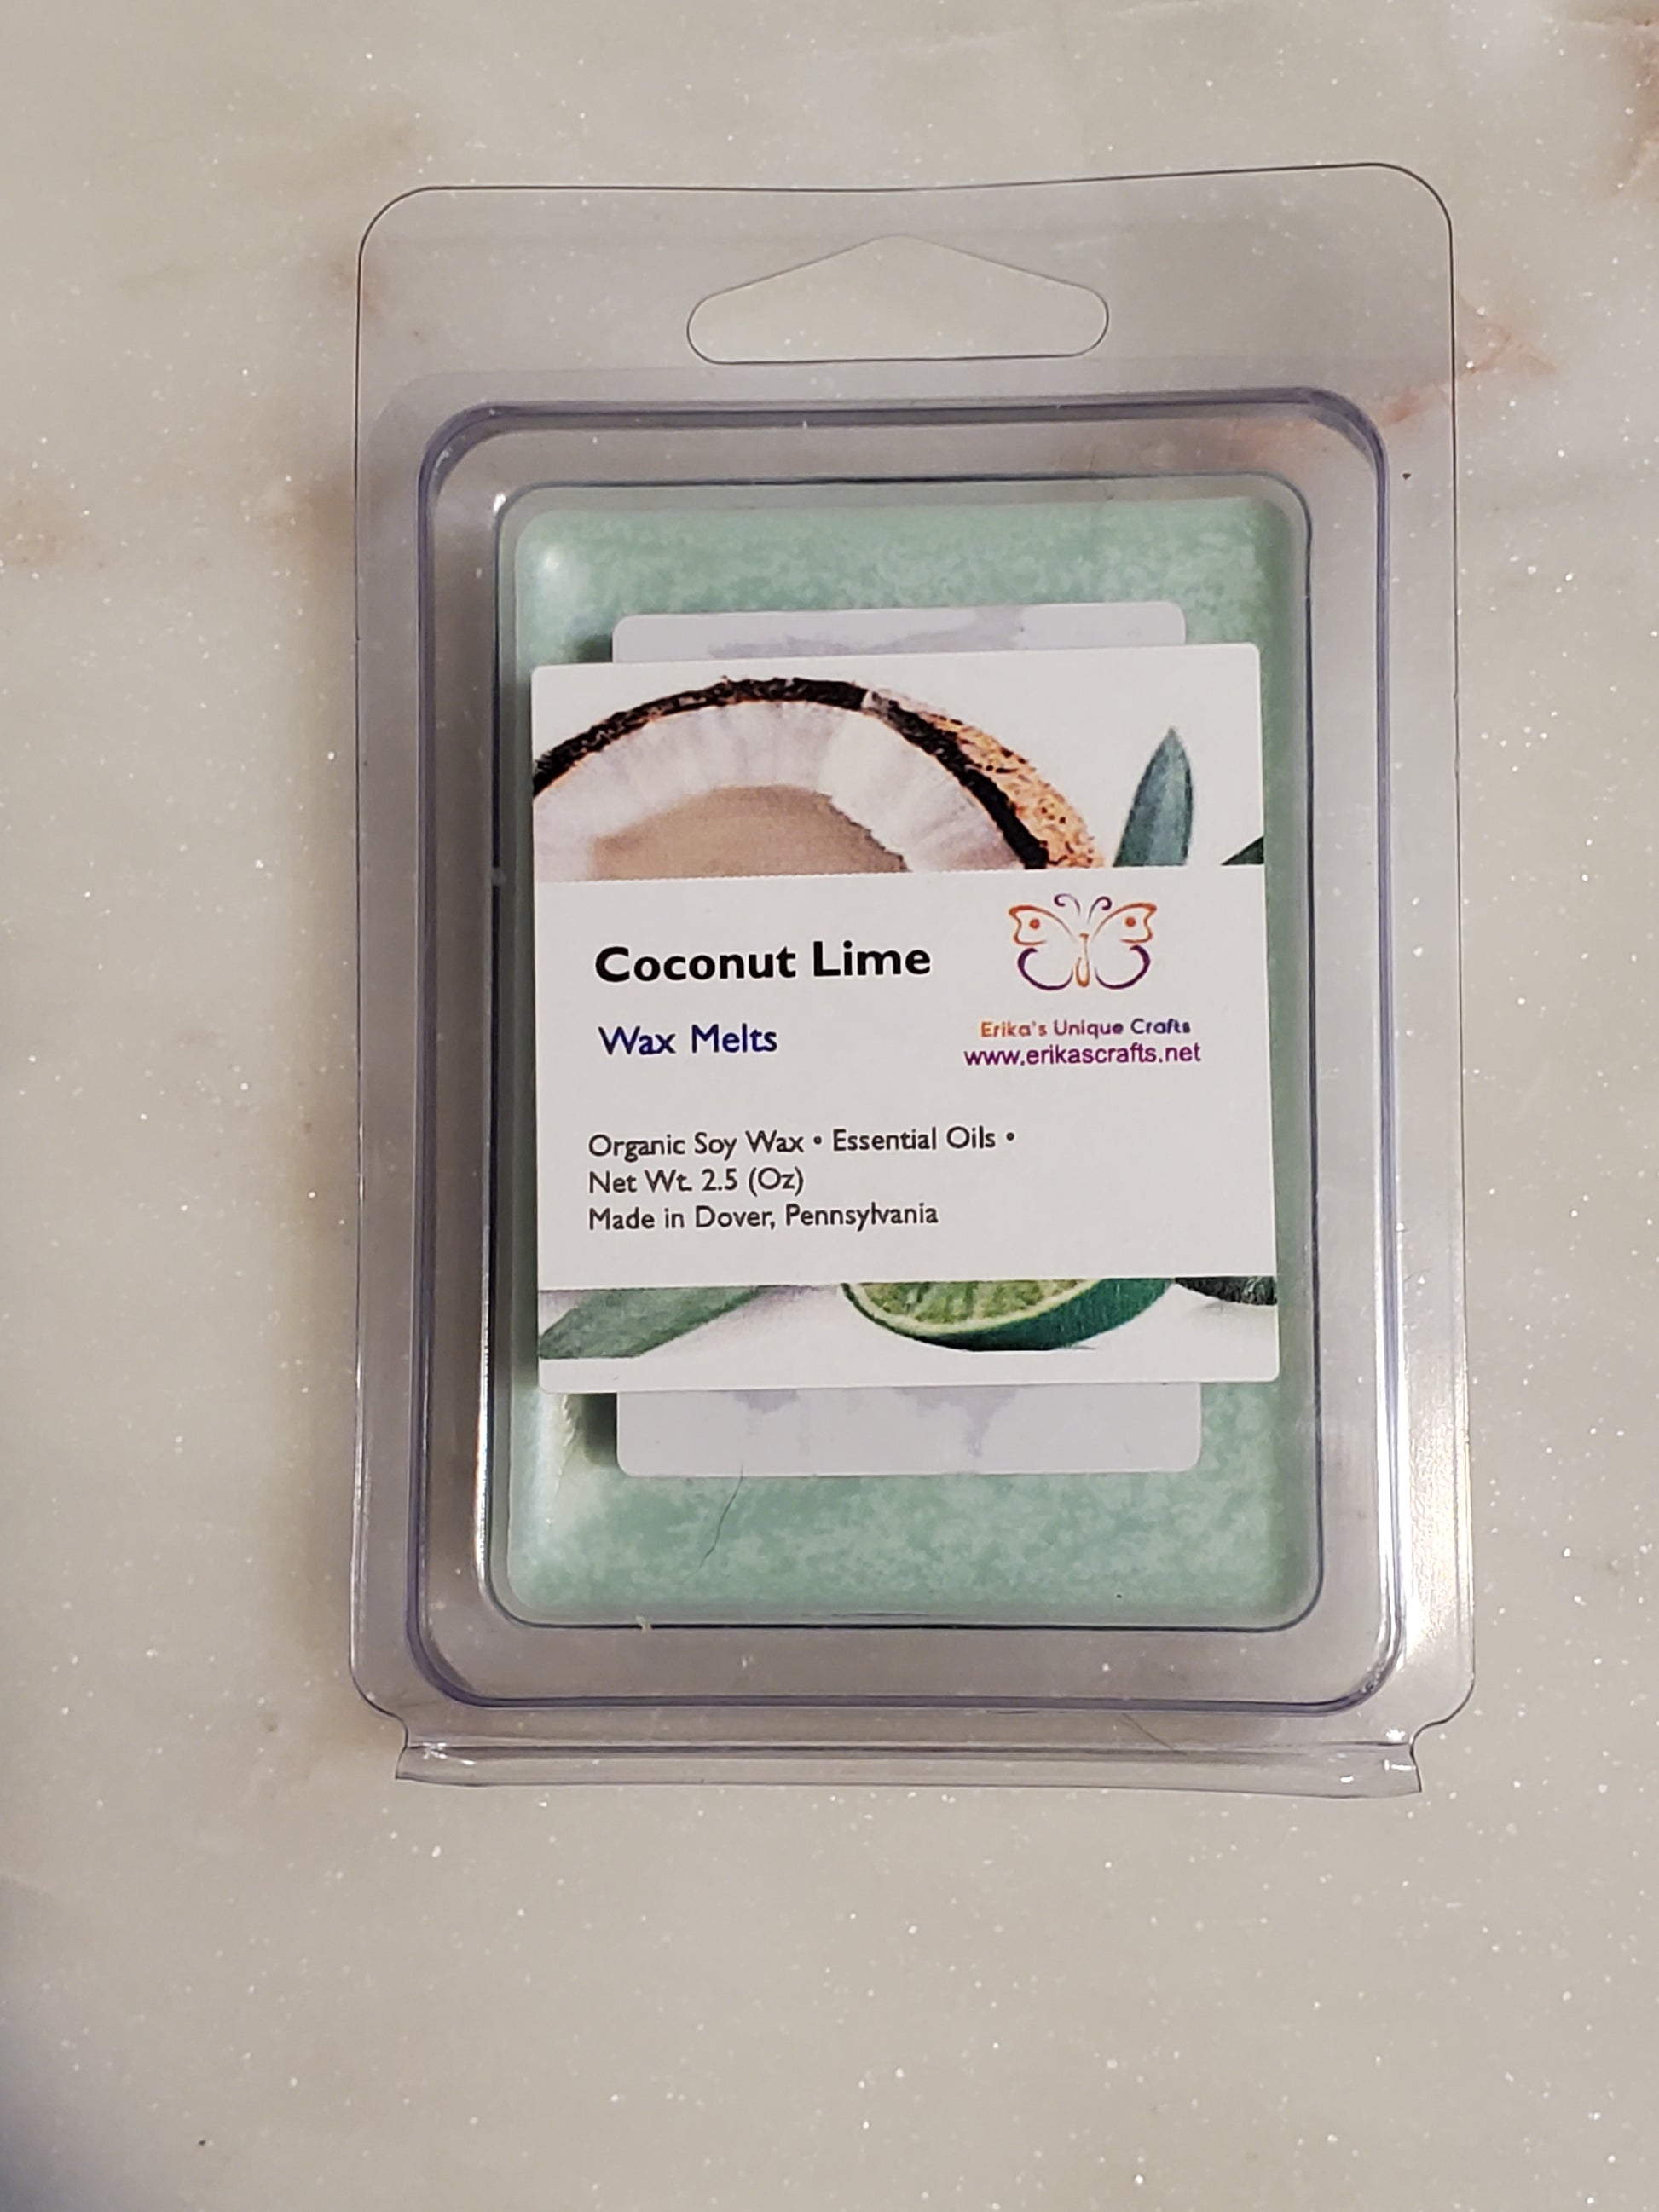 Coconut Lime Wax Melts - Erikas Crafts